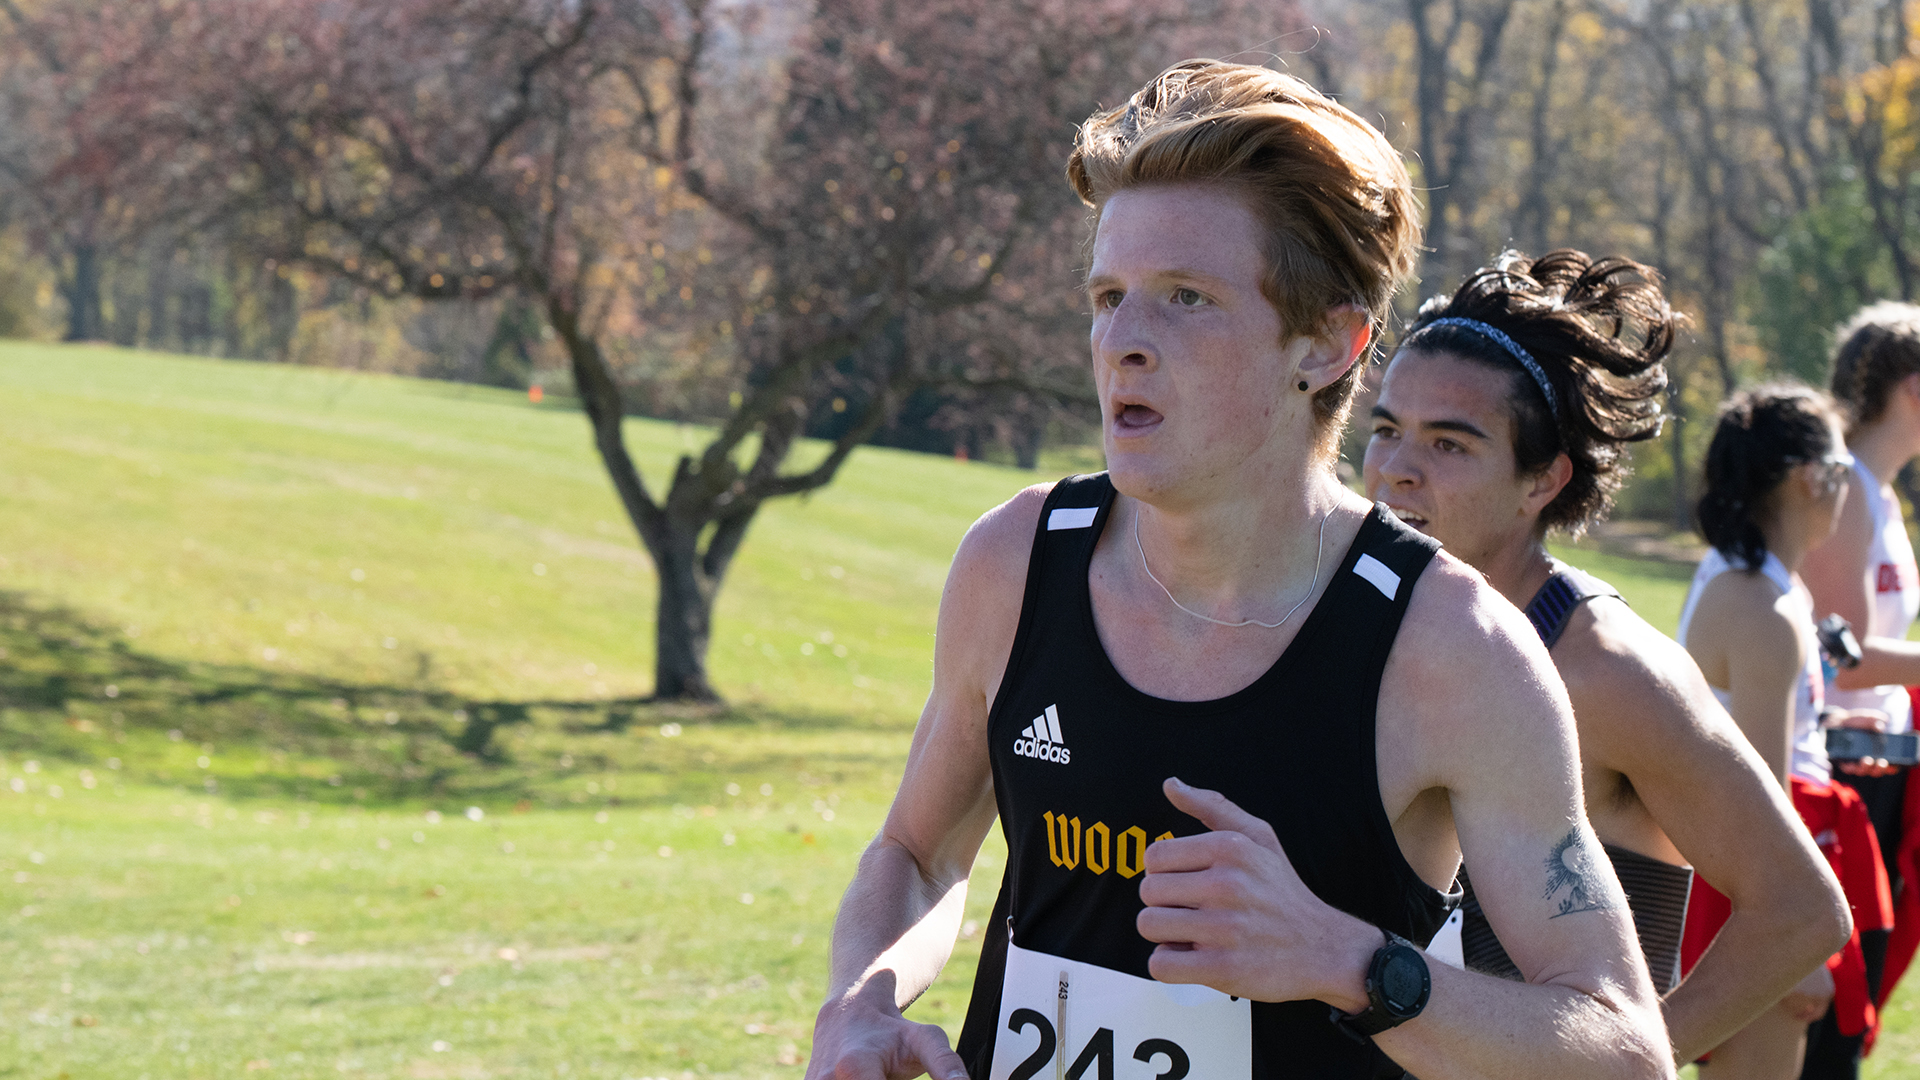 Will Callender, Wooster Cross Country